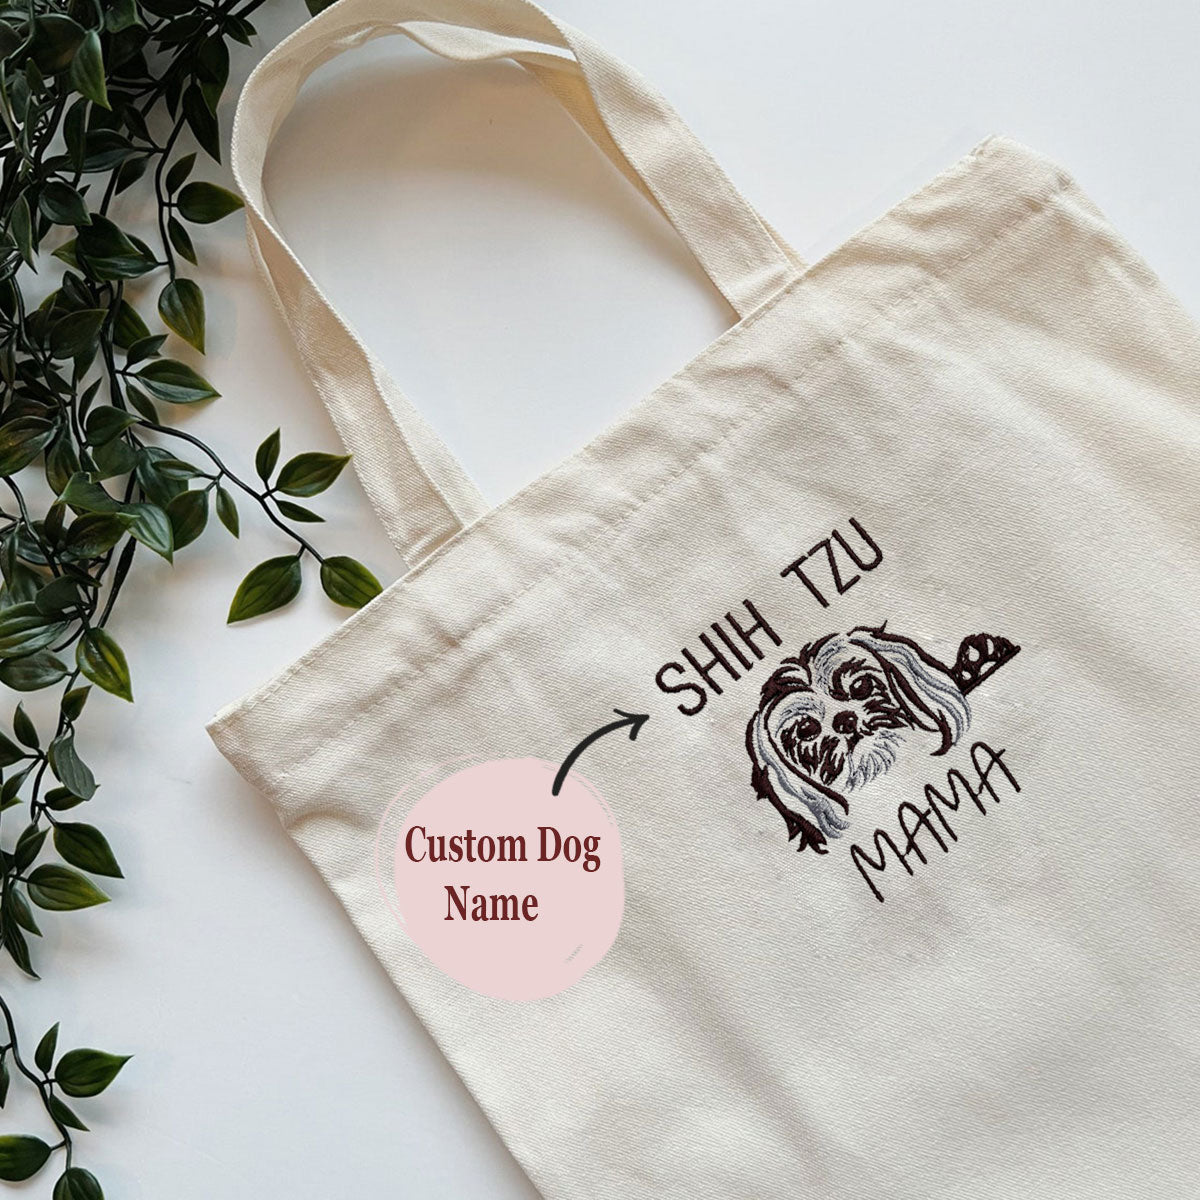 Custom Shih Tzu Dog Mama Embroidered Tote Bag, Personalized Tote Bag with Dog Name, Best Gifts For Shih Tzu Lovers